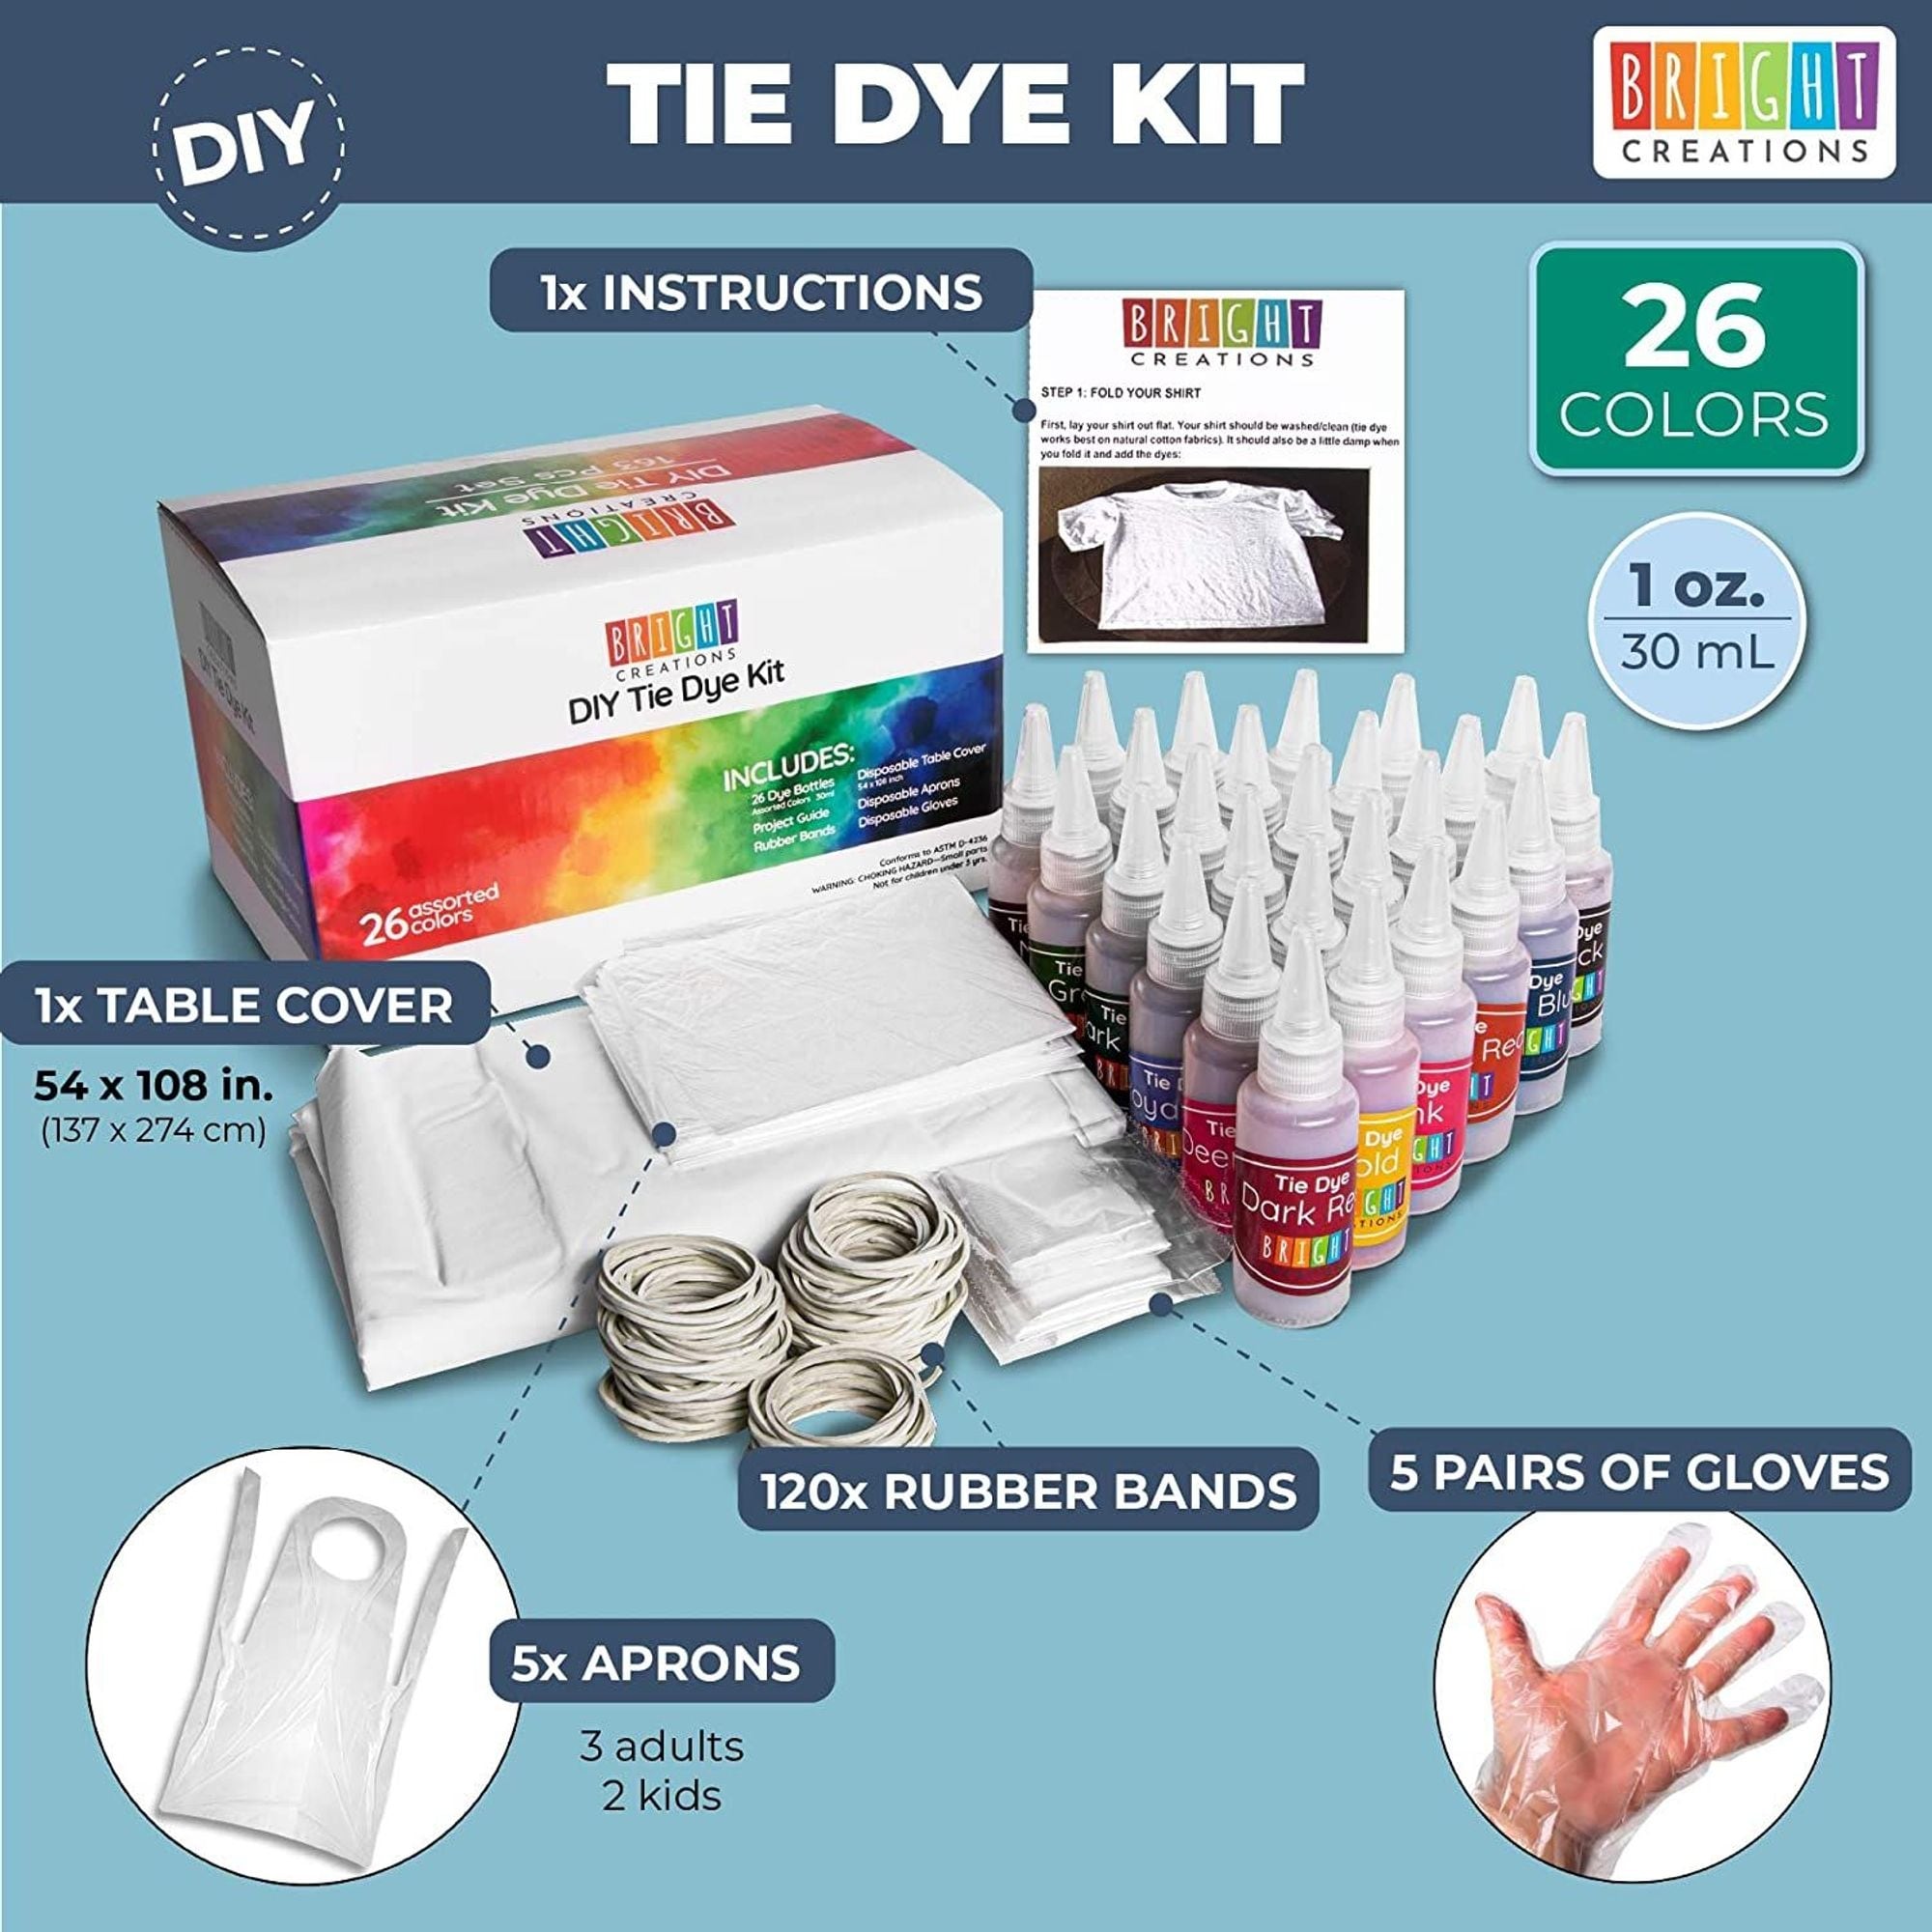 Tie Dye Kit - 40 Colors Permanent Fabric Dye with Rubber Bands, Gloves,  Table Cover, Apron for Kids and Adults Tie-Dye Art - All-in-1 Textile Paint